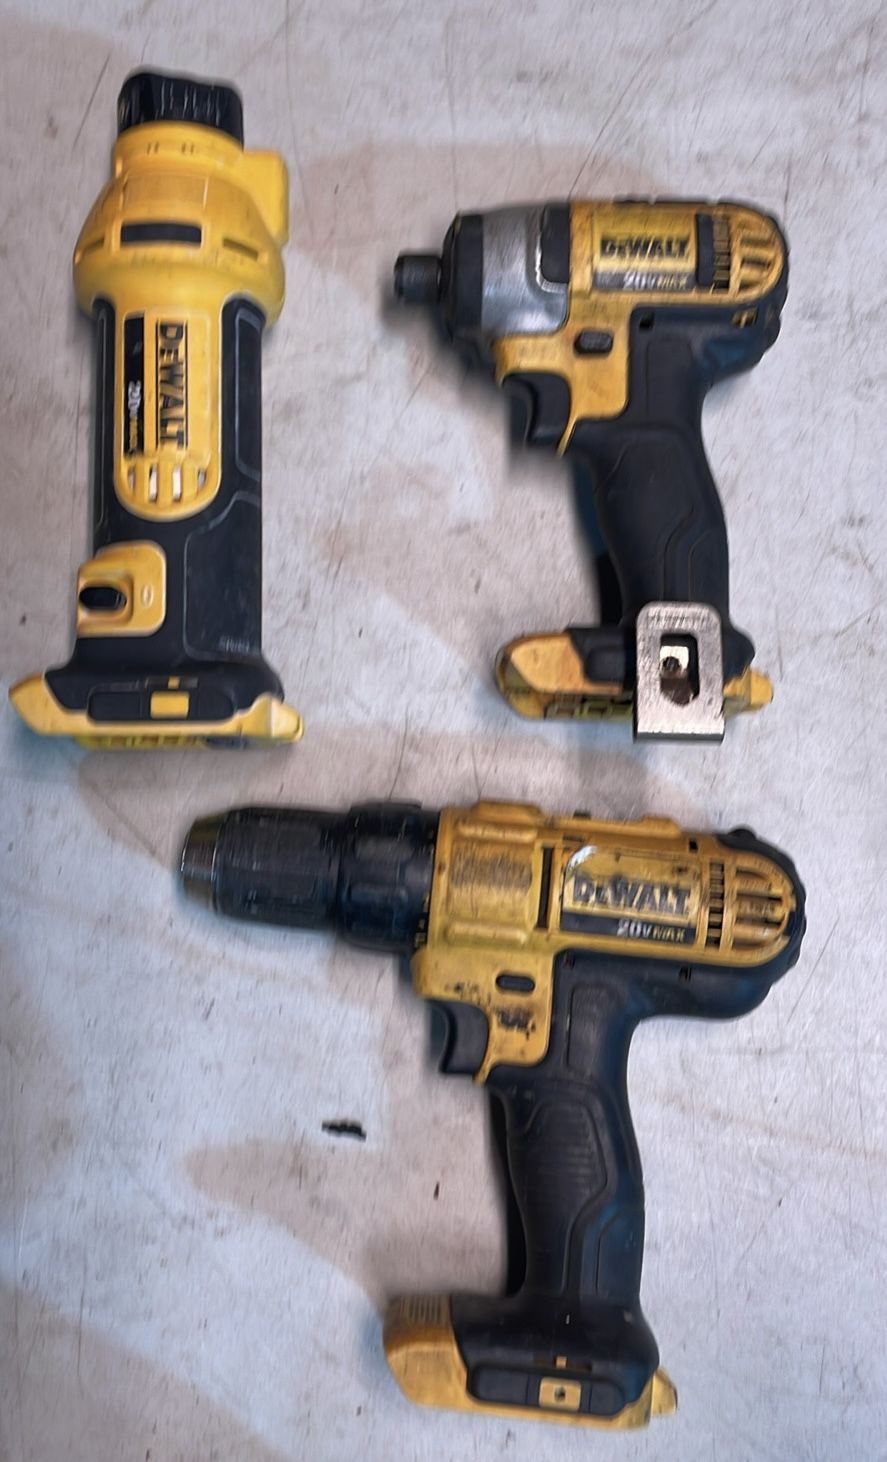 set of 3 Dewalt tools, impact drill, drill driver and cut-out tool